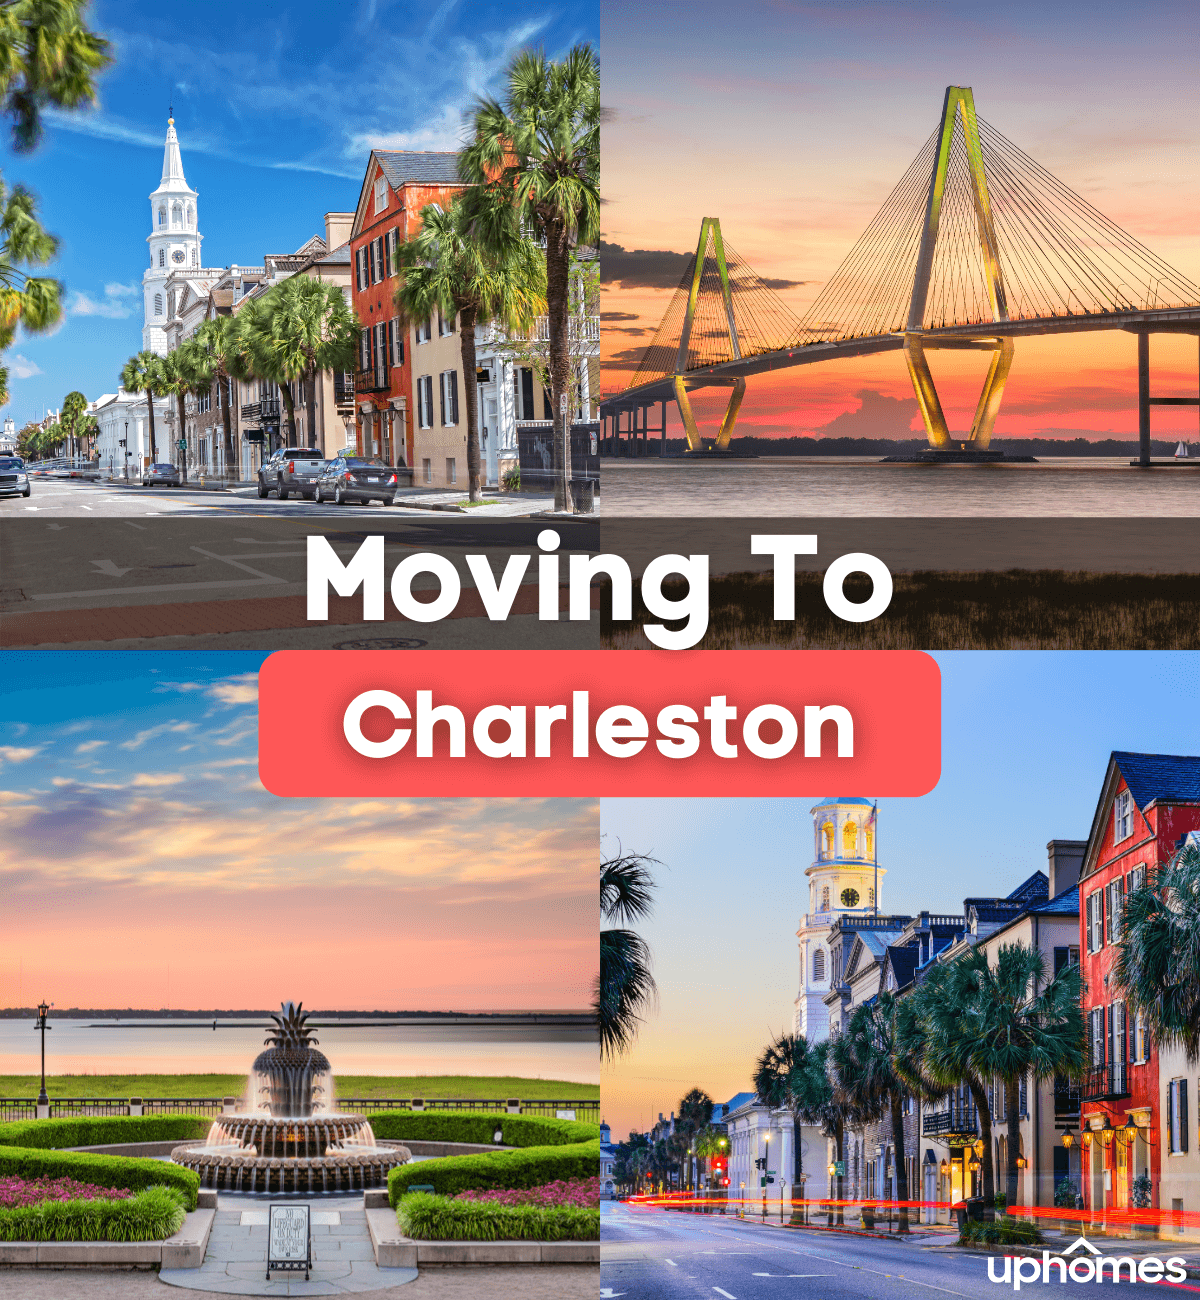 Moving to Charleston, SC - What is life like living in Charleston?